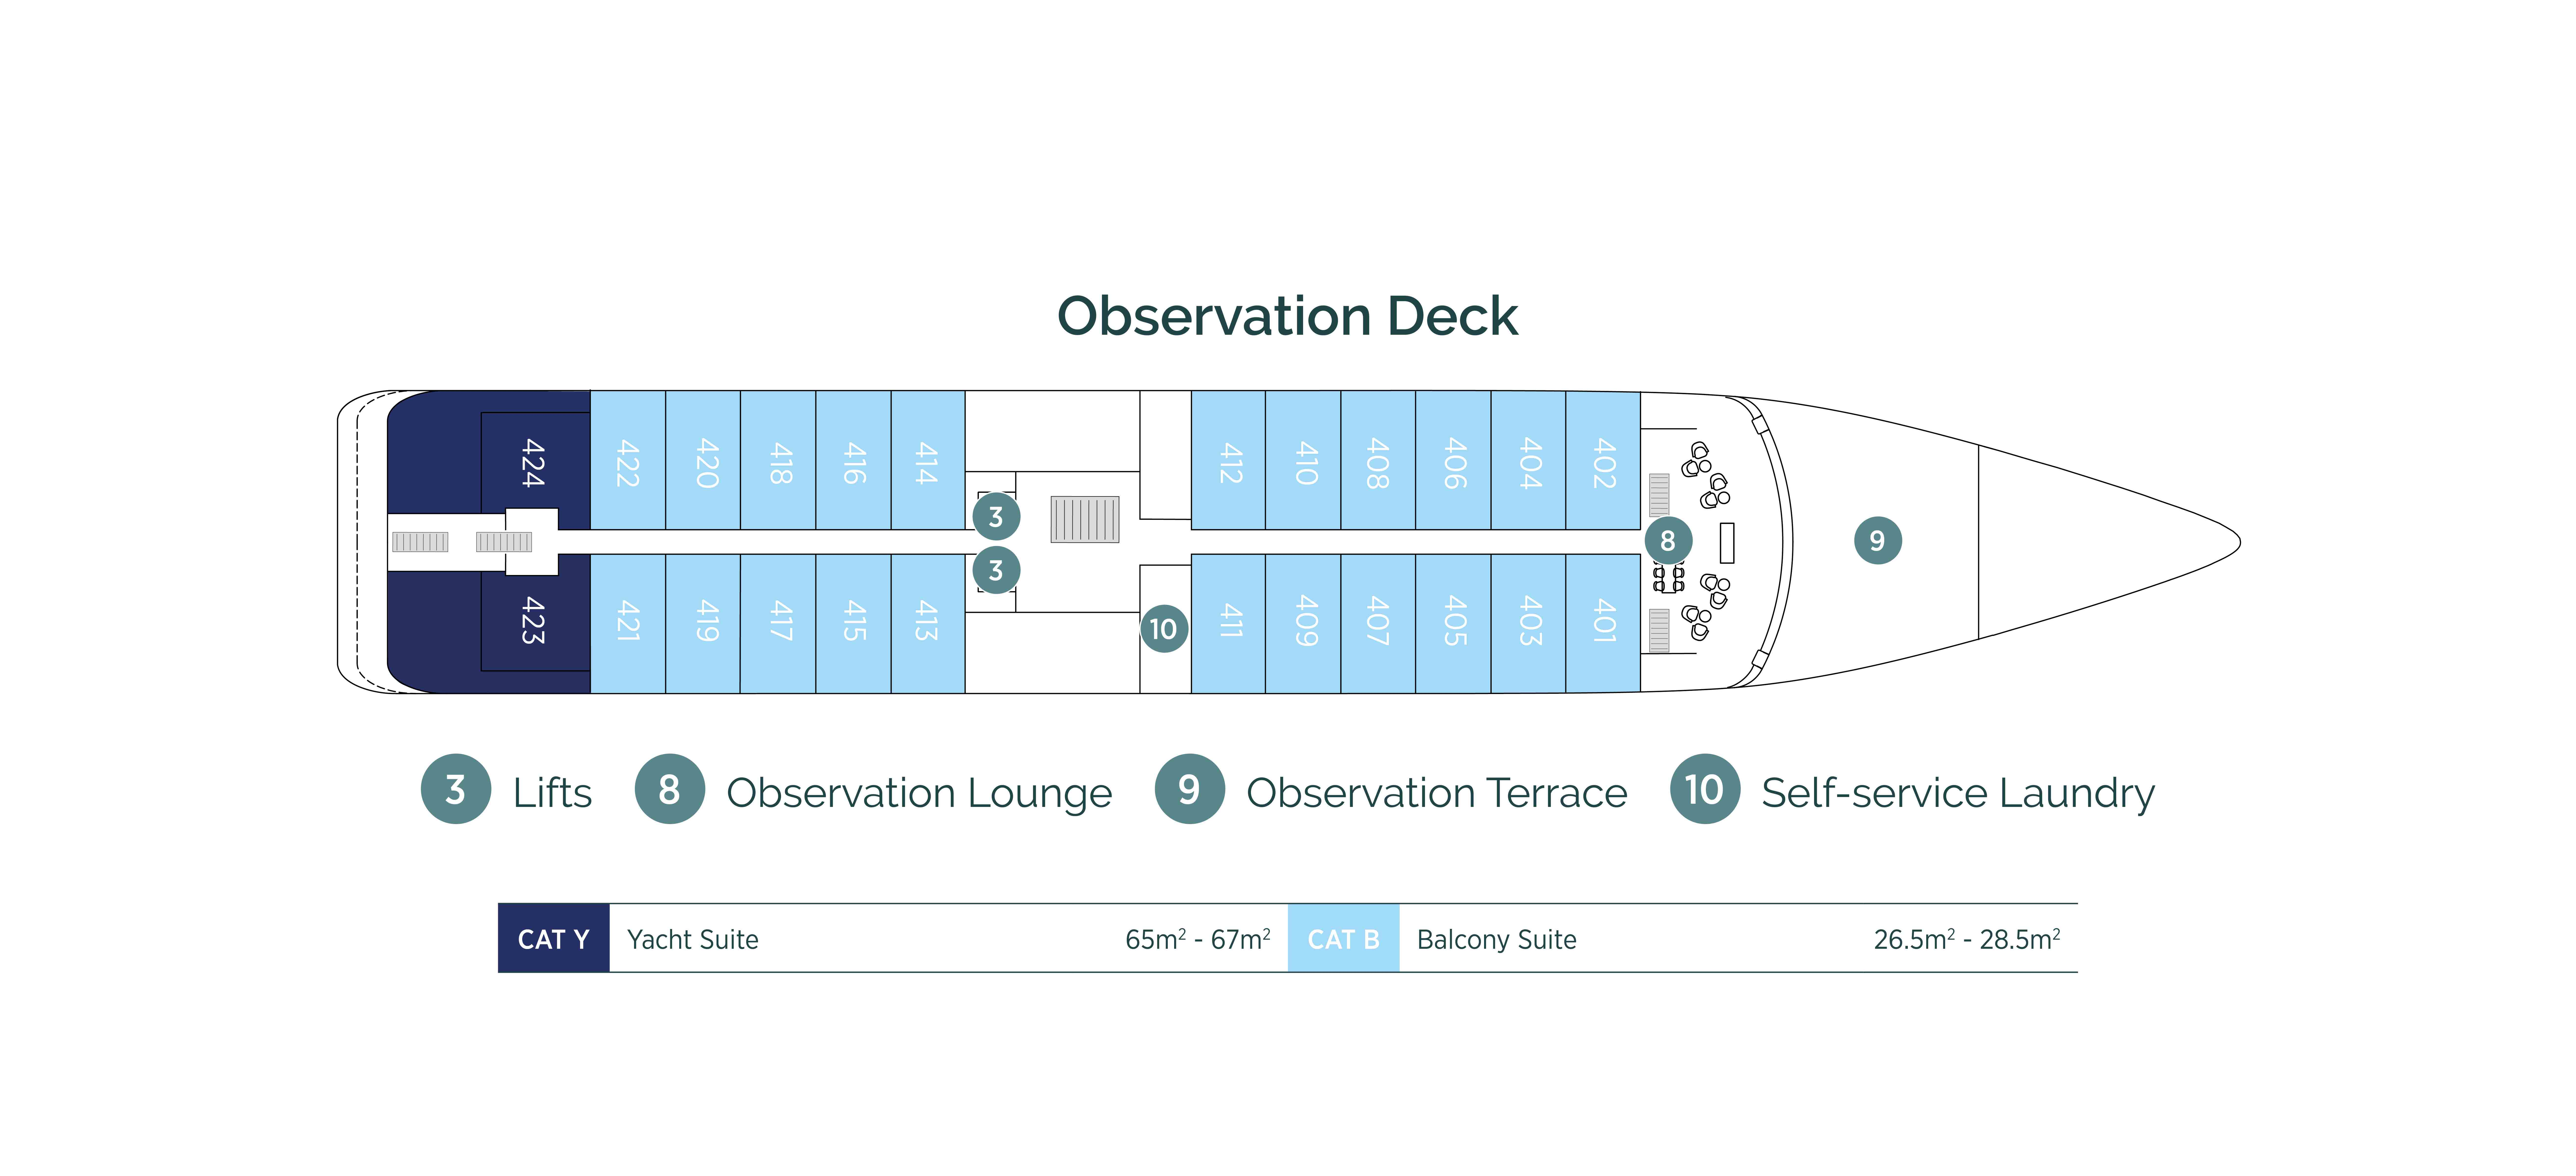 Diagram of ship layout for the Observation Deck of an Emerald Cruises luxury yacht